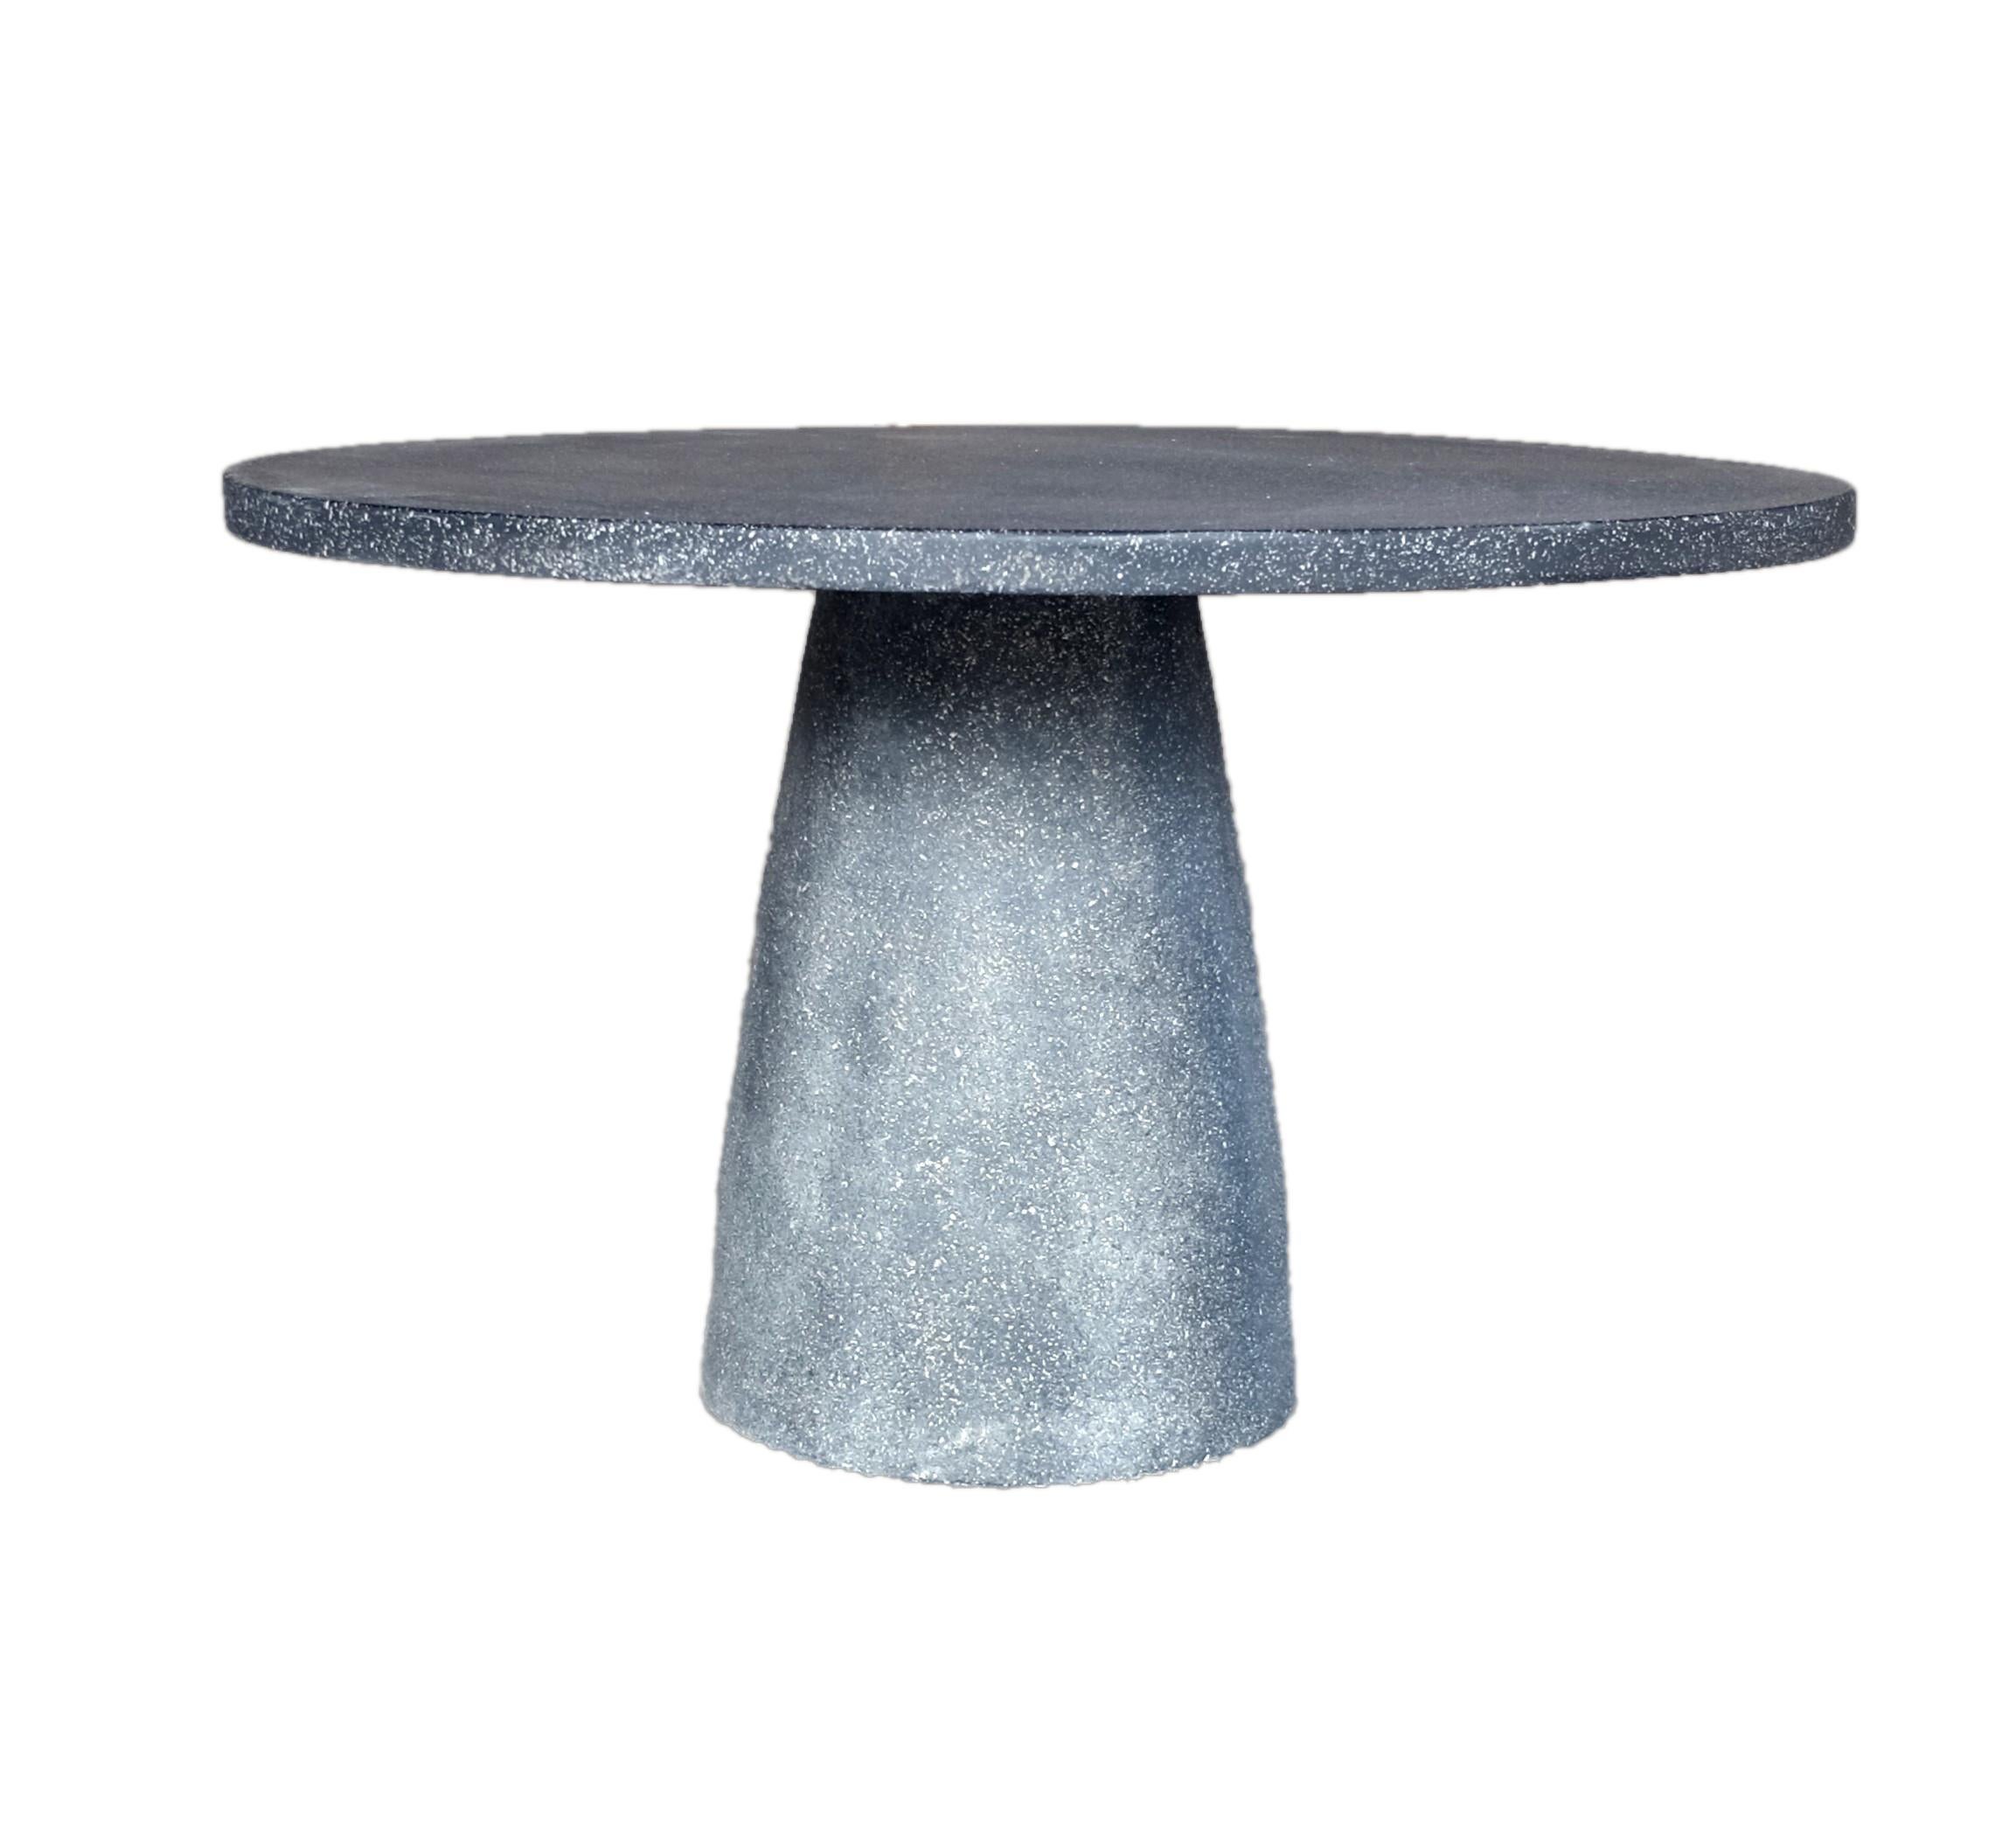 Cast Resin 'Hive' Dining Table, Coal Stone Finish by Zachary A. Design